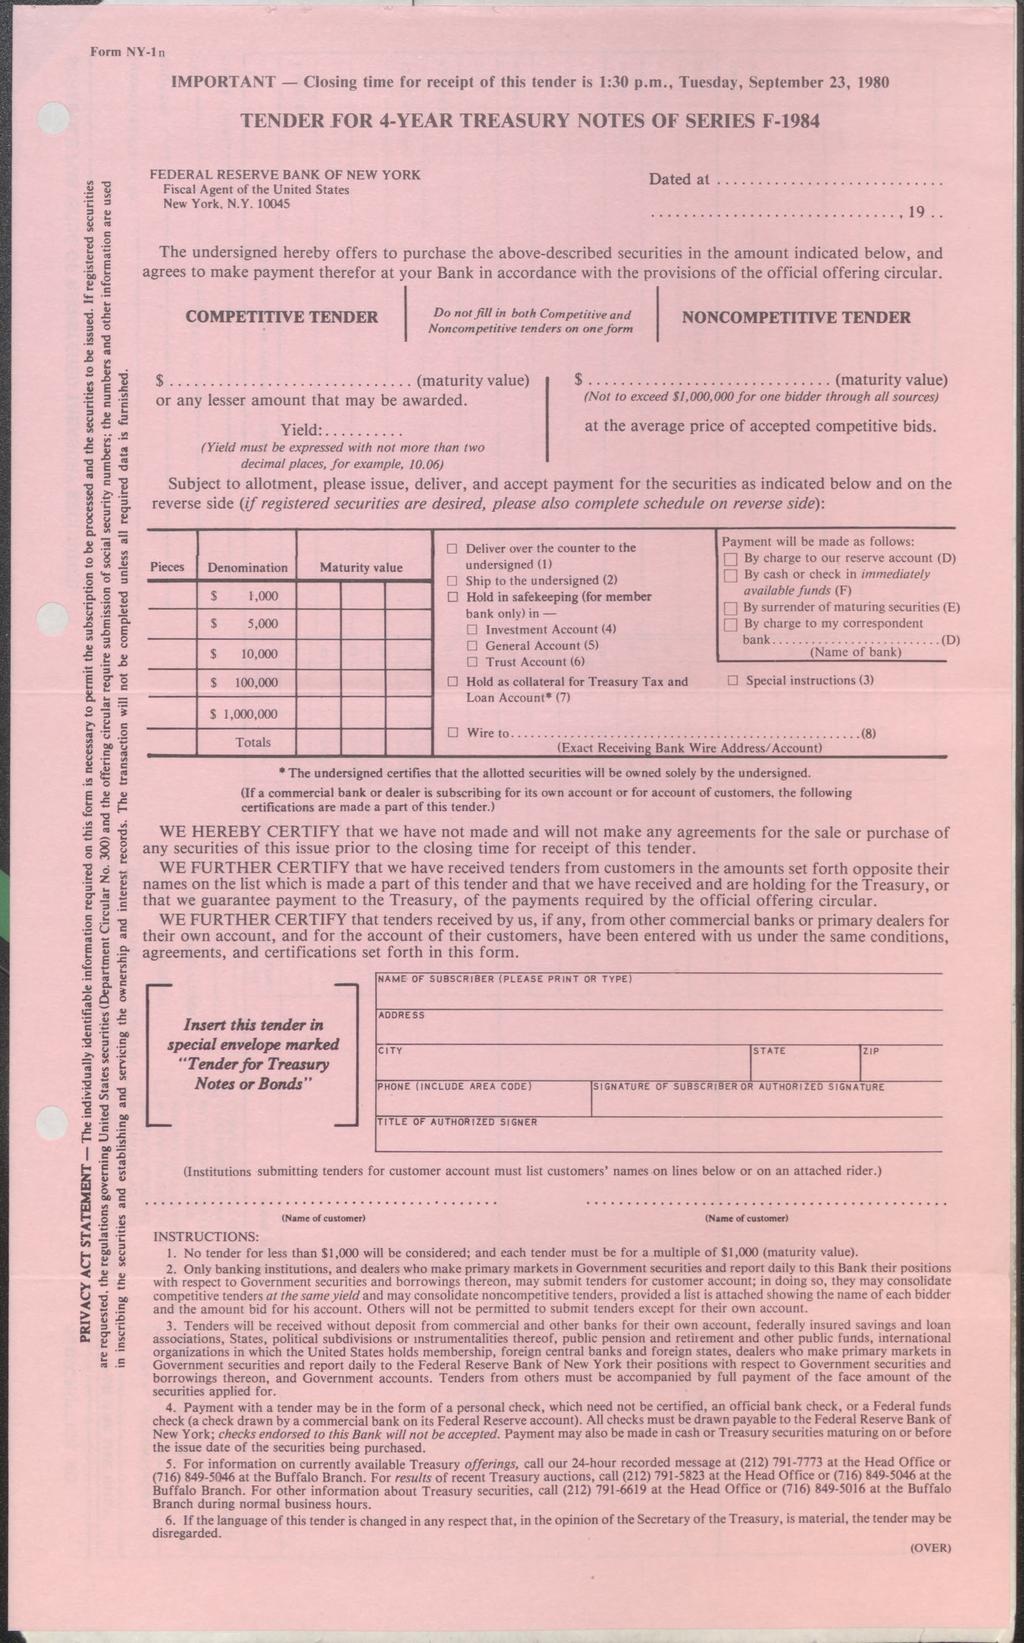 Form NY-ln IM PO R T A N T Closing time for receipt of this tender is 1:30 p.m., Tuesday, Septem ber 23, 1980 T E N D E R E O R 4 -Y E A R T R E A S U R Y N O T E S O F S E R IE S F -1984 PRIVACY ACT